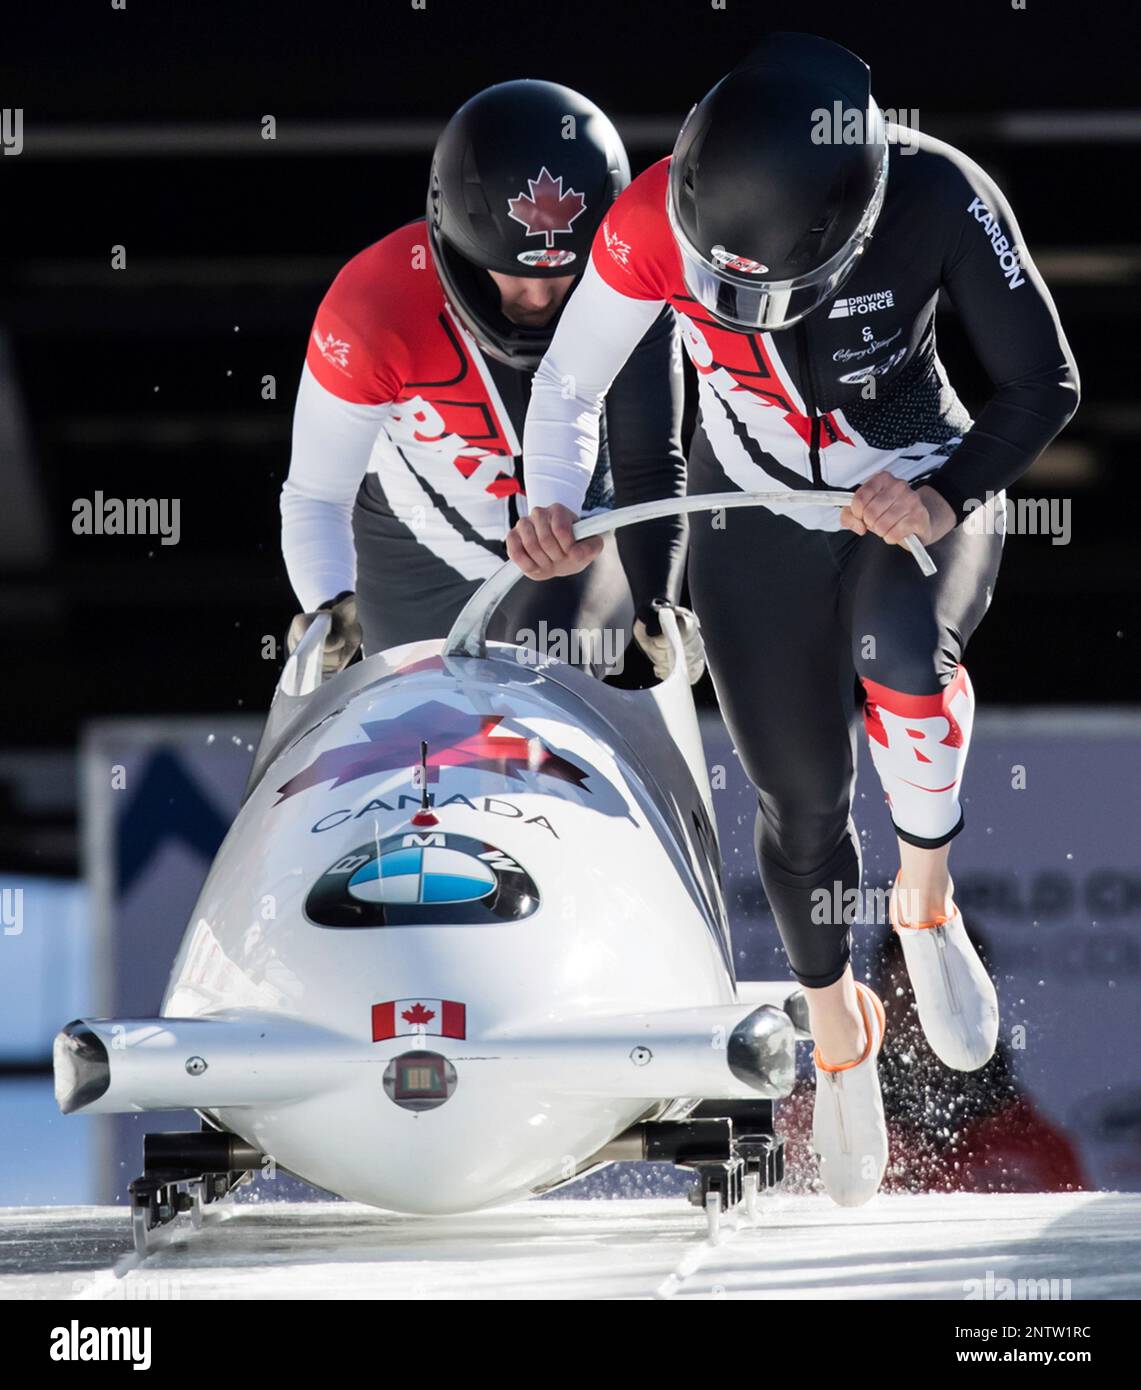 Canadas Kori Hol, front, and Melissa Lotholz race down the track on their third run during the womens bobsled event at the Bobsleigh World Championships in Whistler, British Columbia, Sunday March 3,